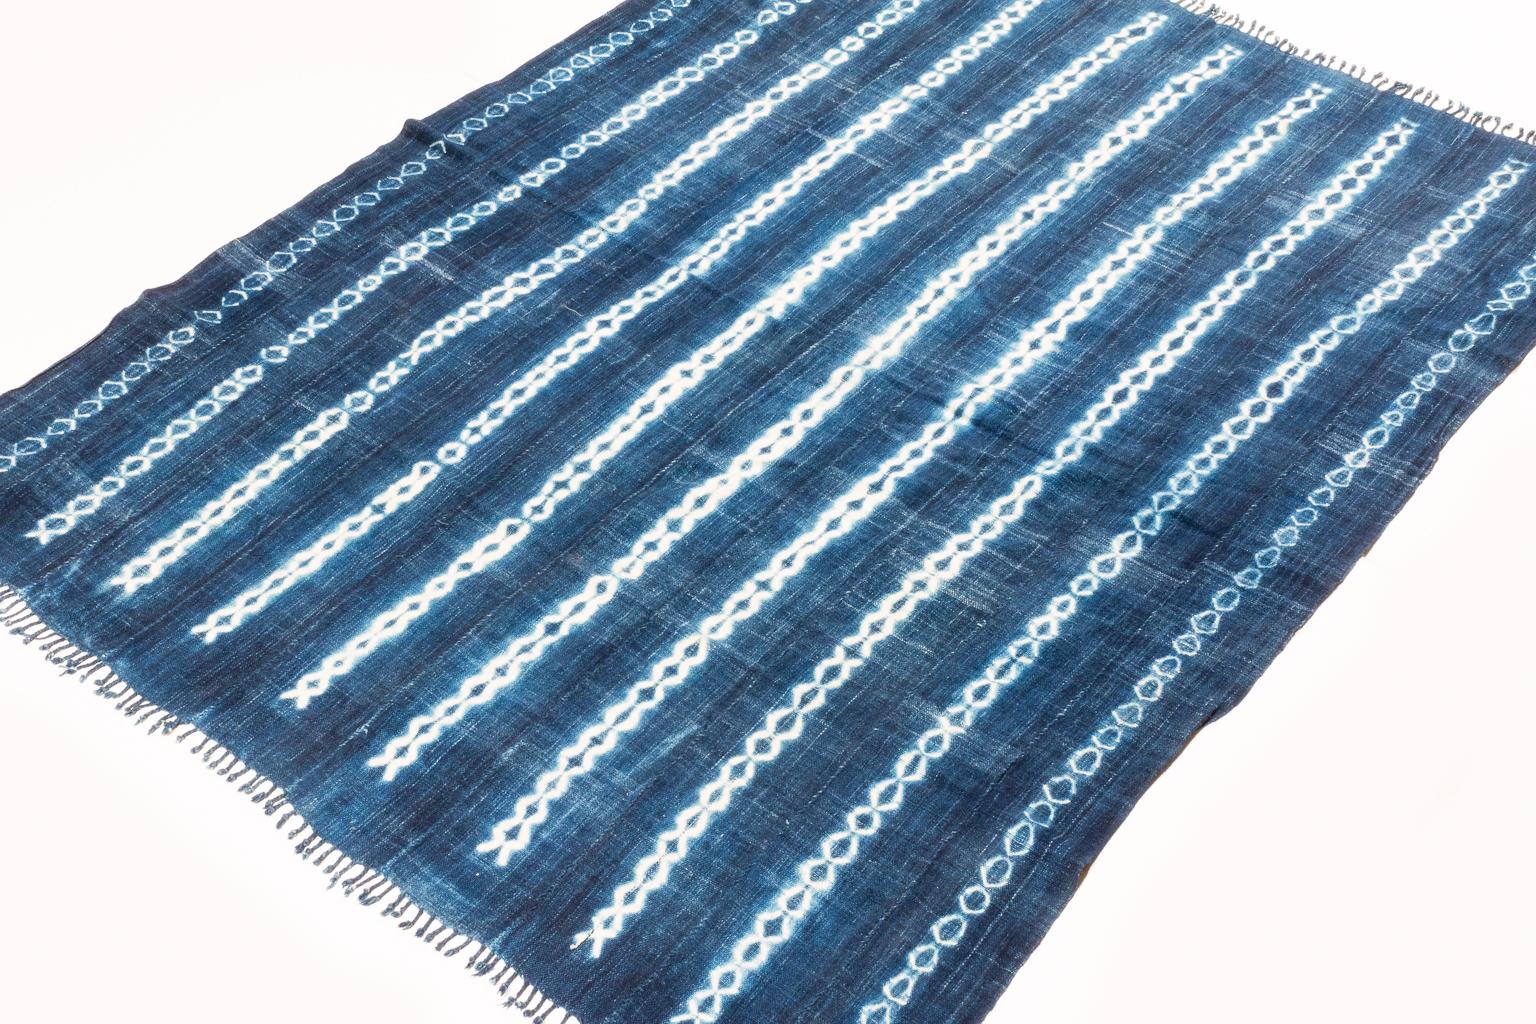 Very soft hand spun cotton, luminous indigo blue color with white design motfs. The ends are finished with nice braid-work. A great vintage tribal piece. Measures: 3'7